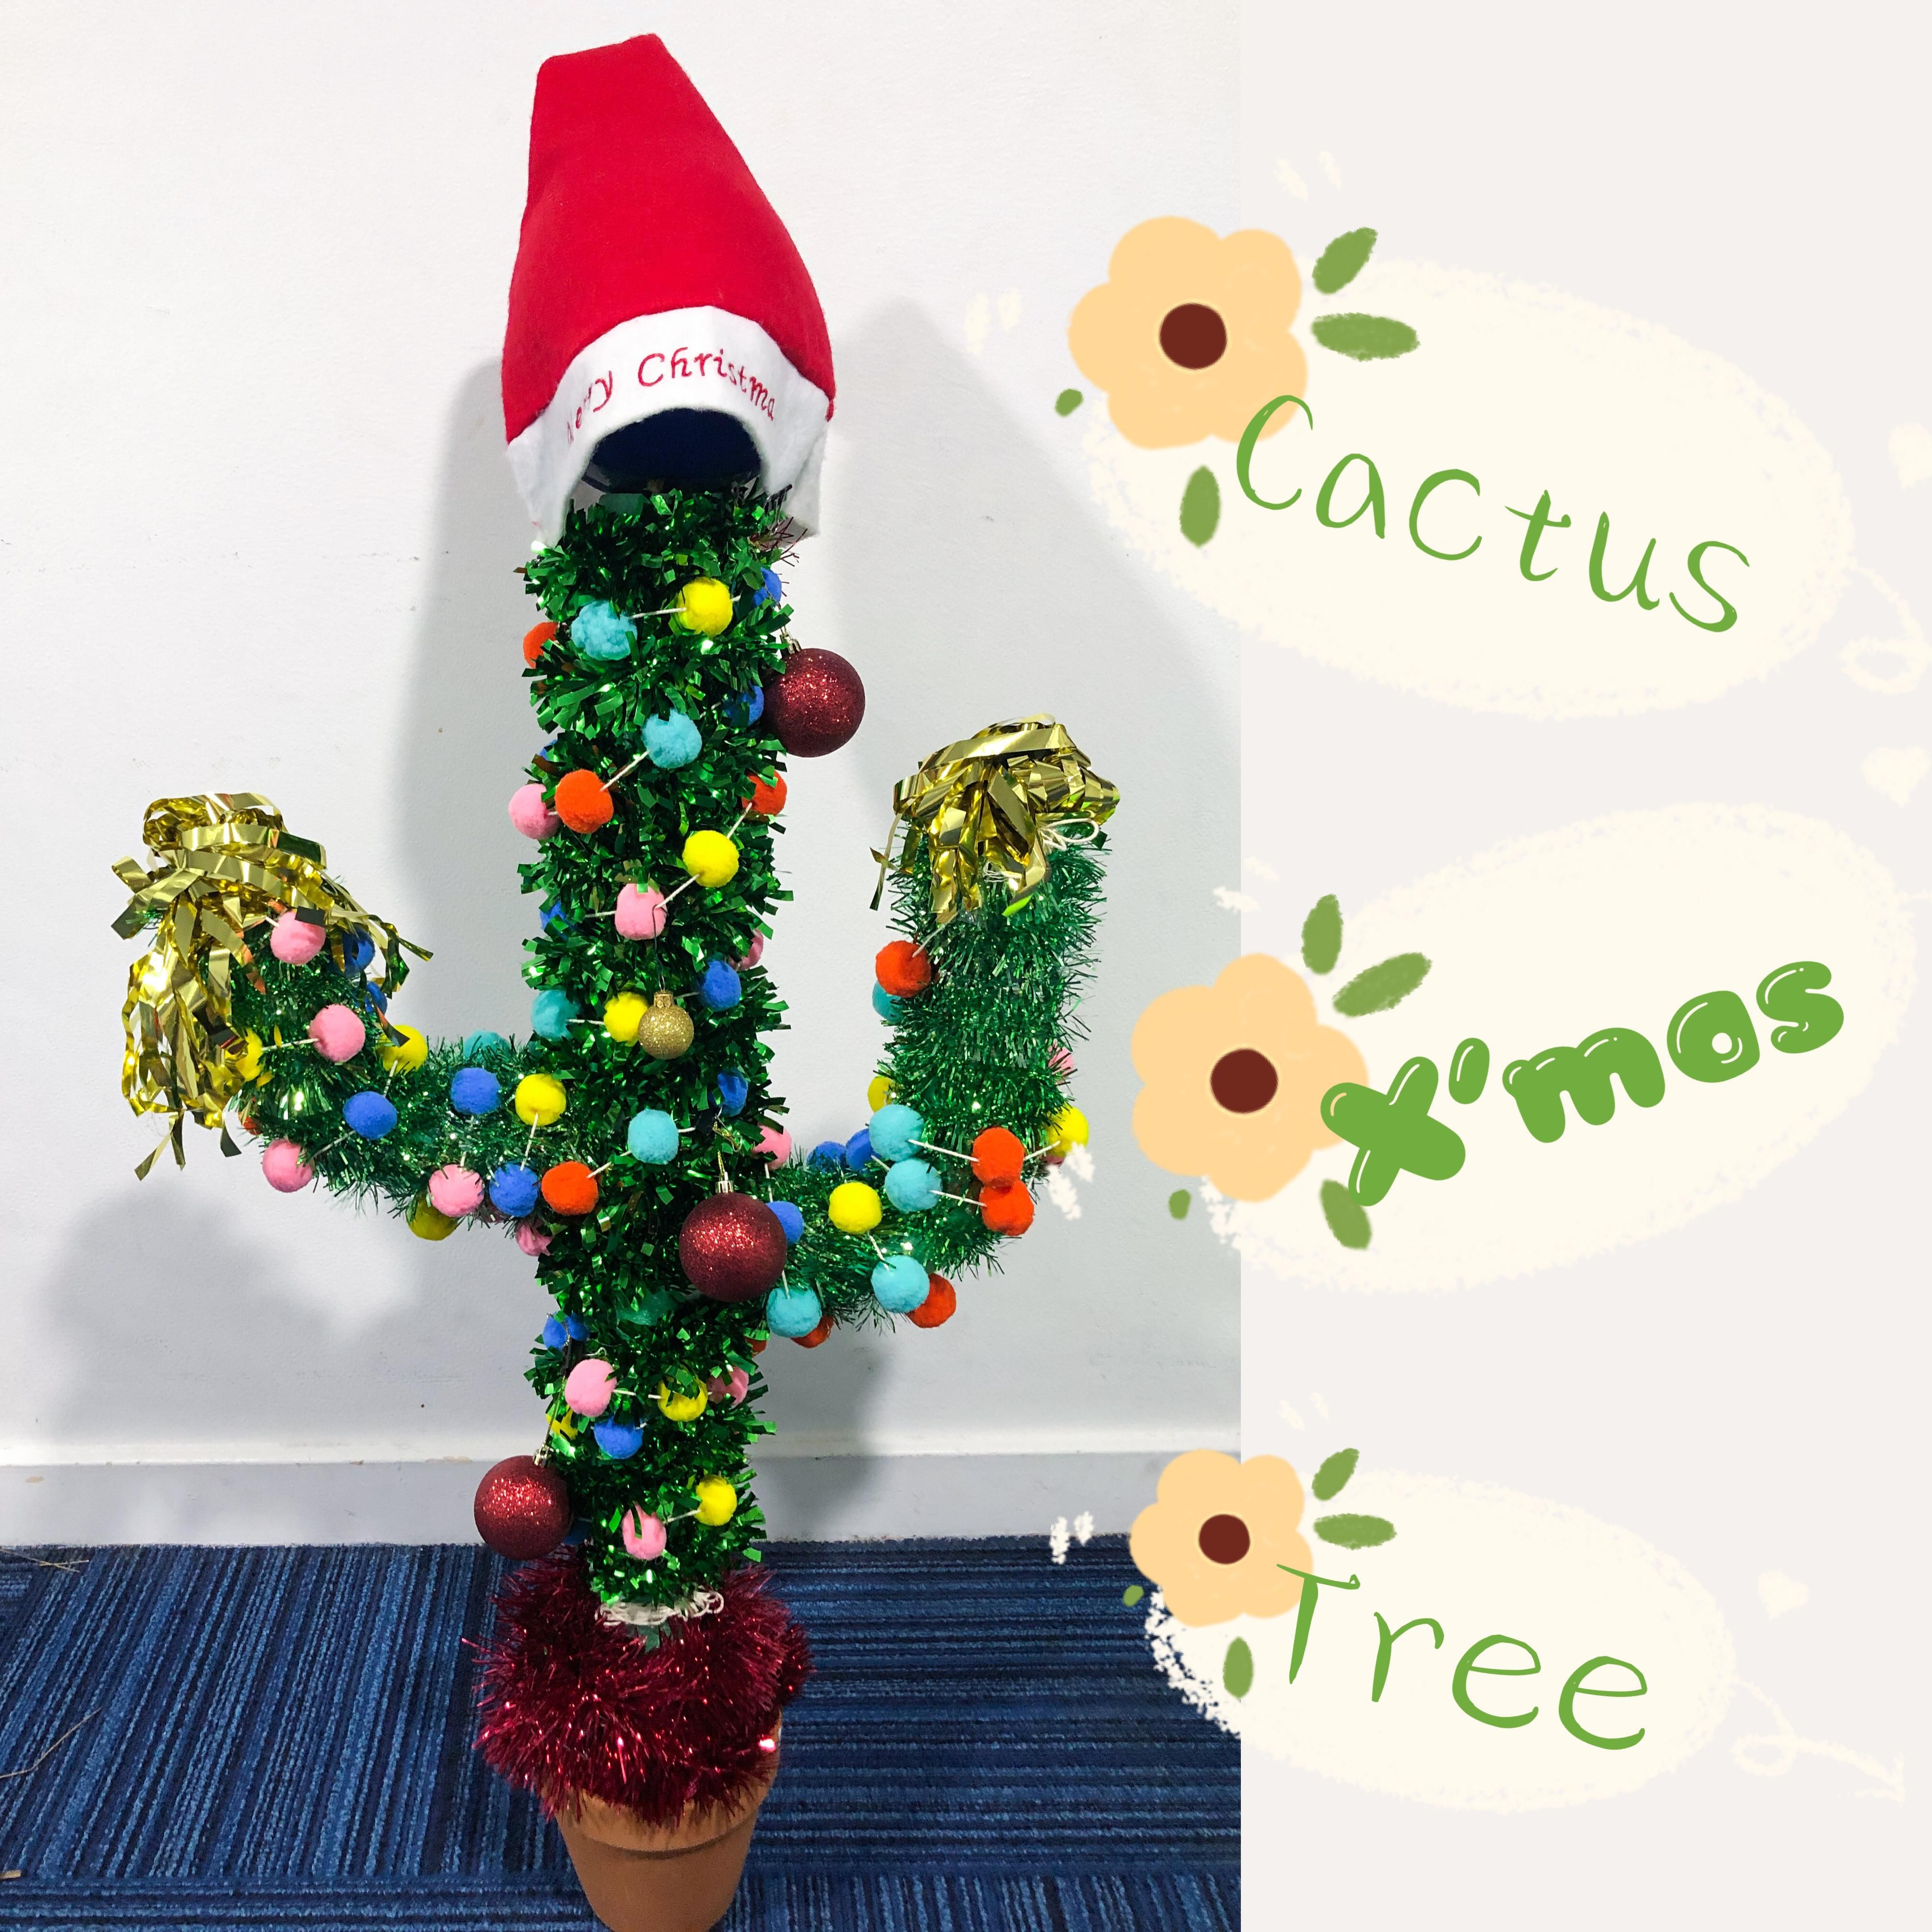 65 Fun & Creative Christmas Decorations Made From Pool Noodles